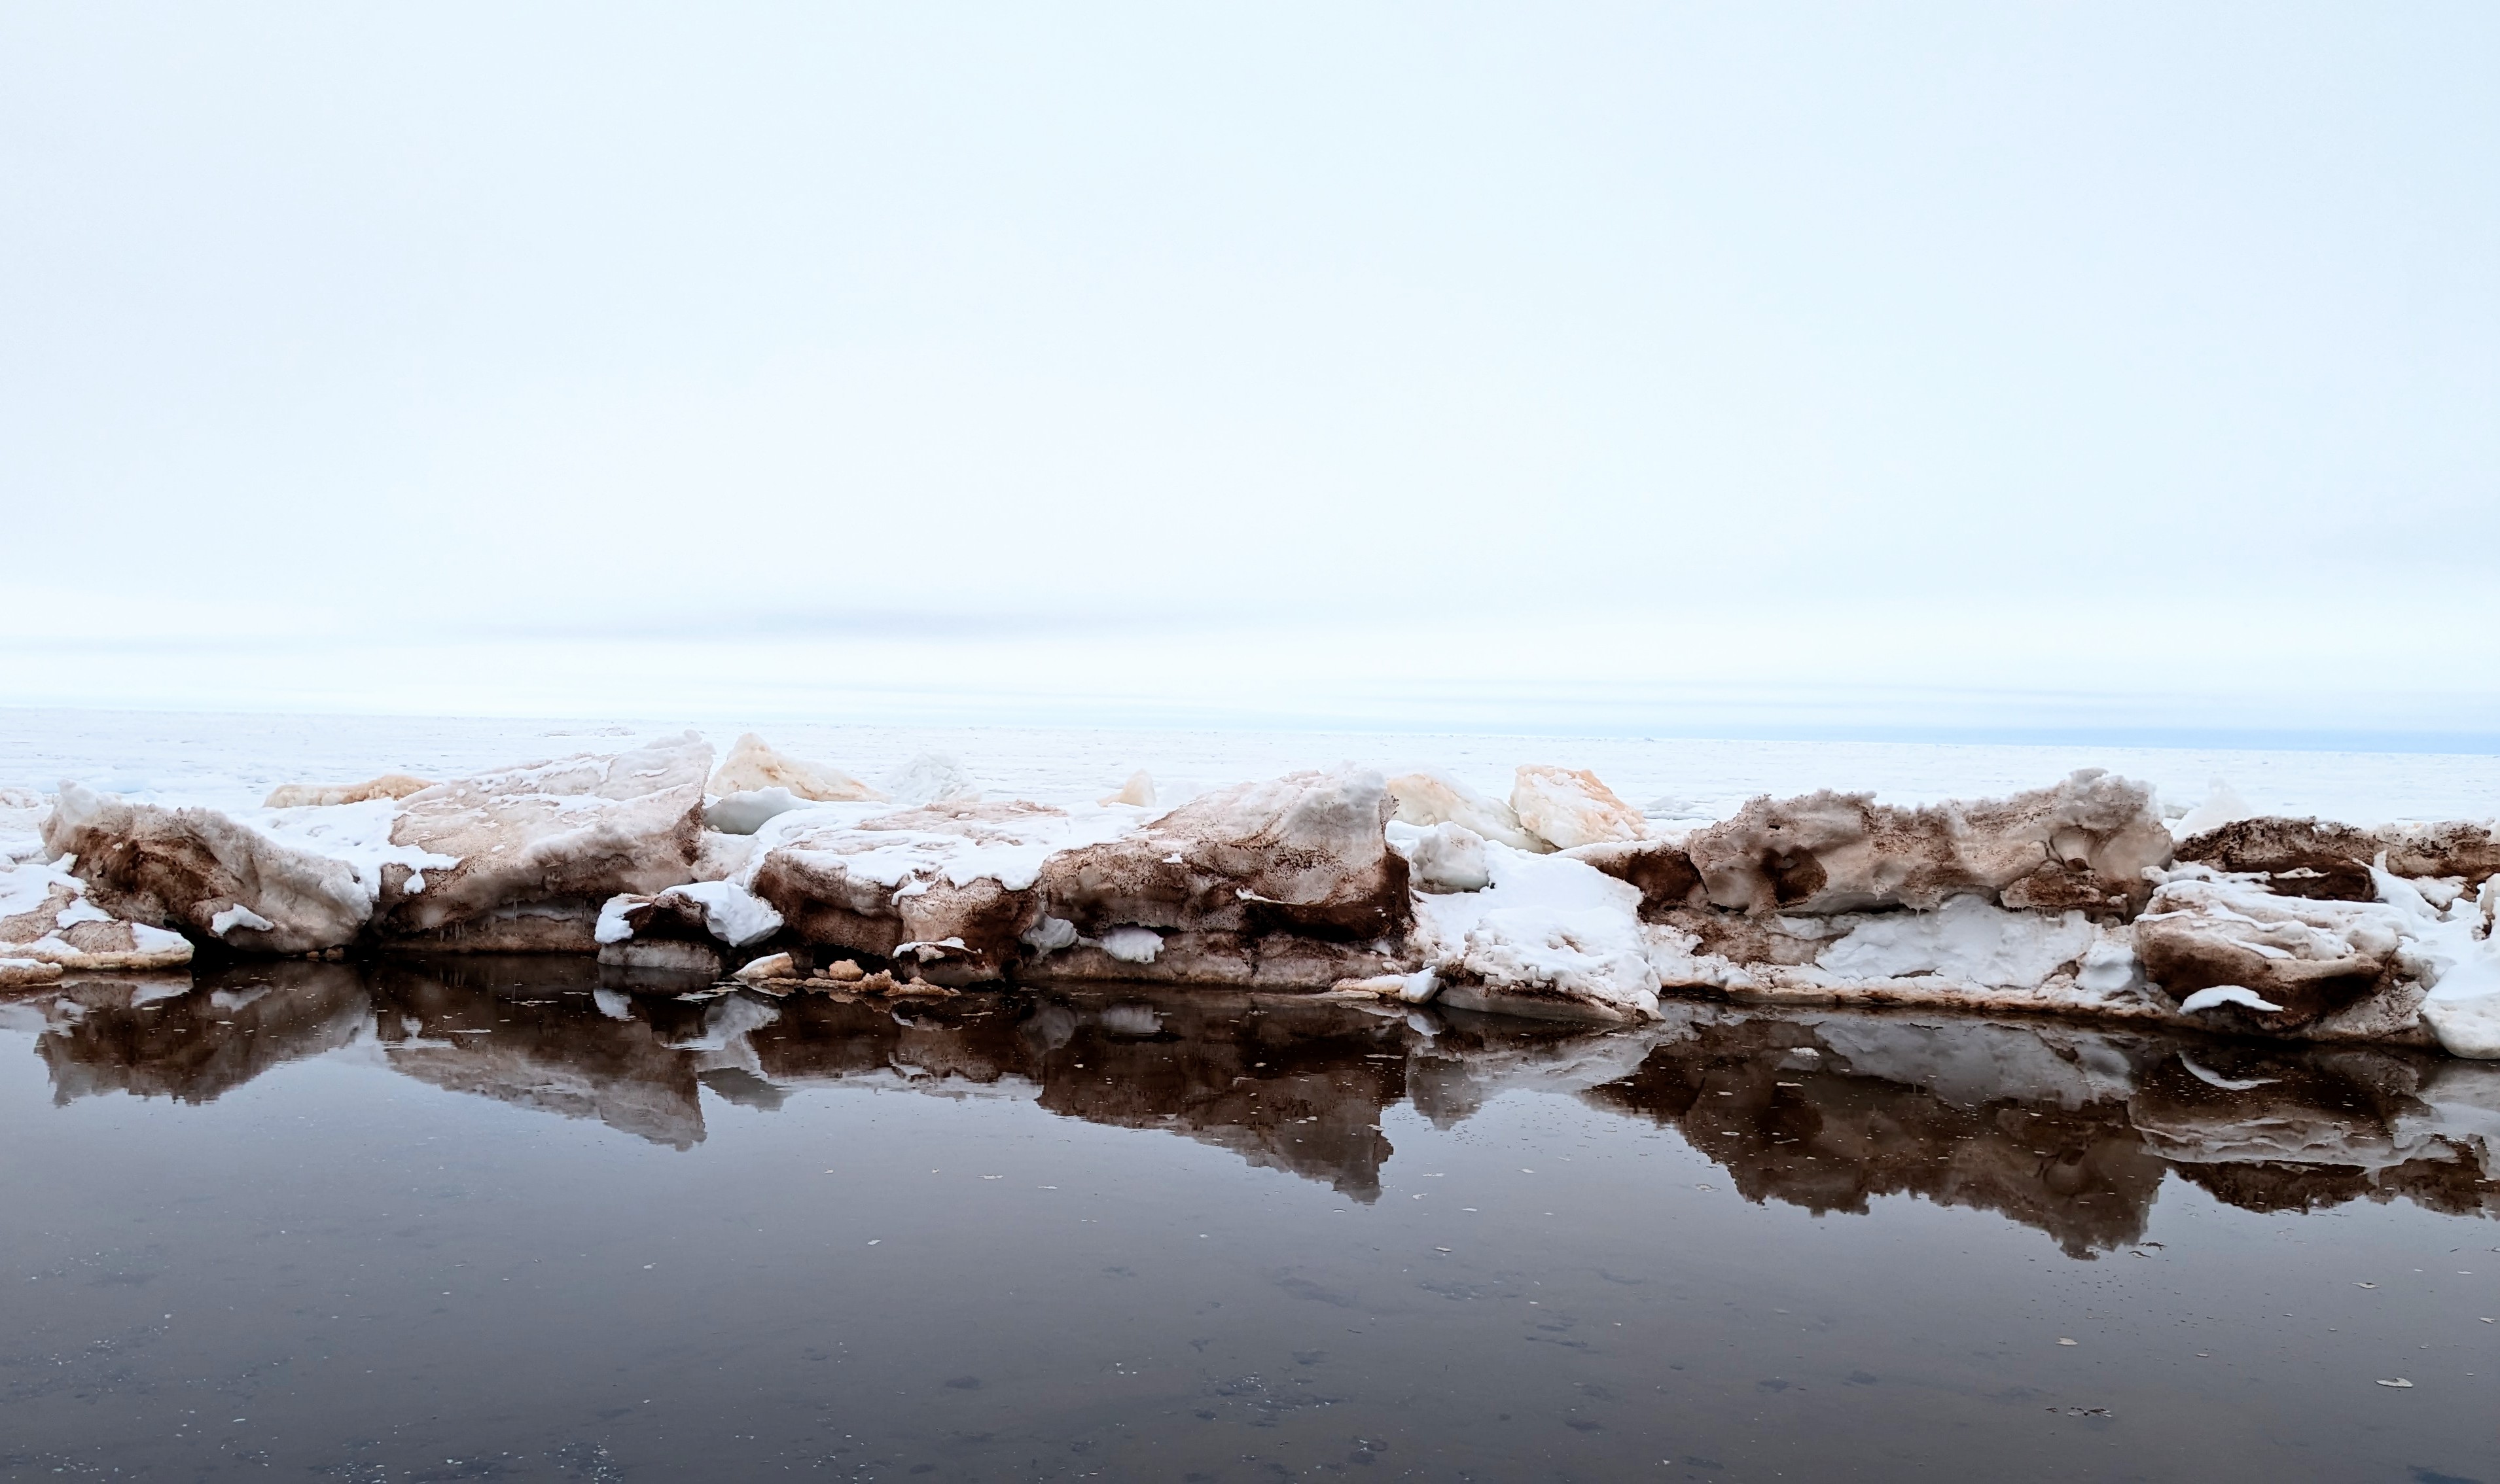 Water and ice at the seashore.